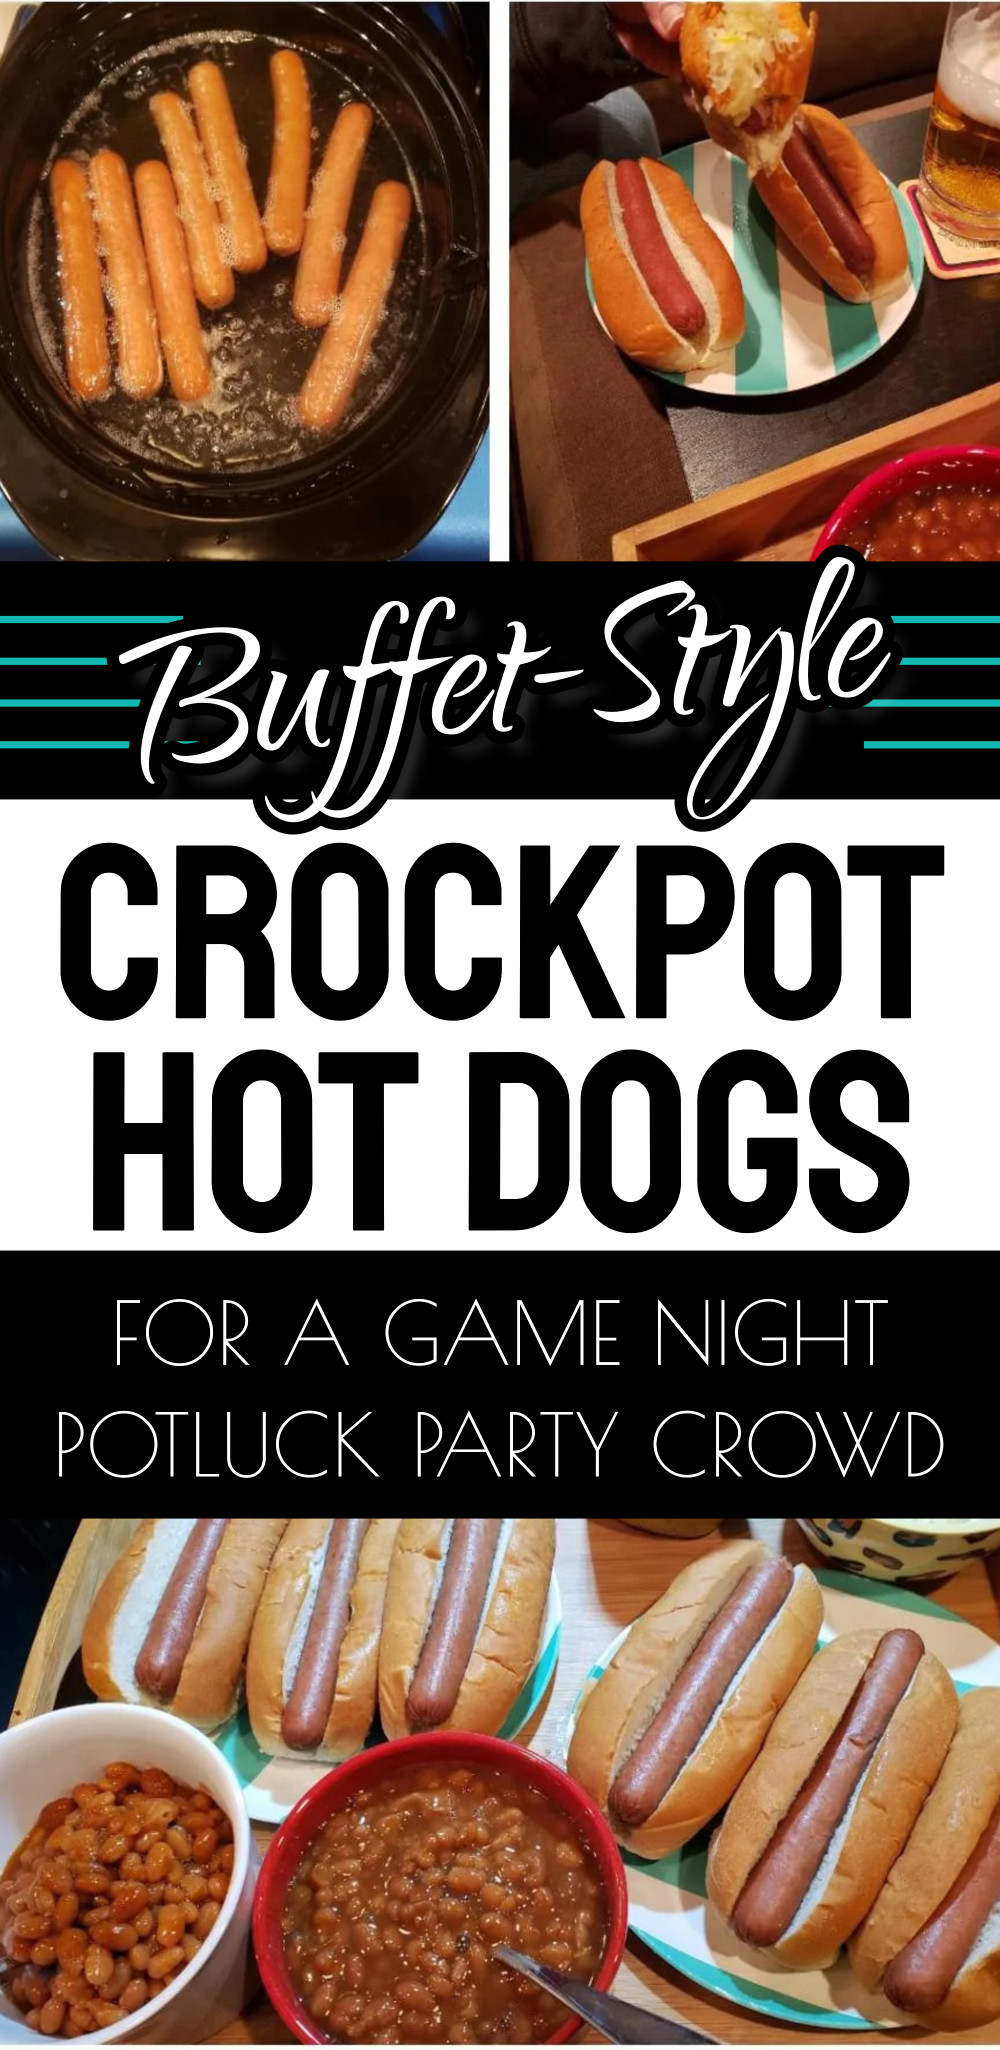 Buffet Style Crockpot Hot Dogs For a Game Night Potluck Party Crowd